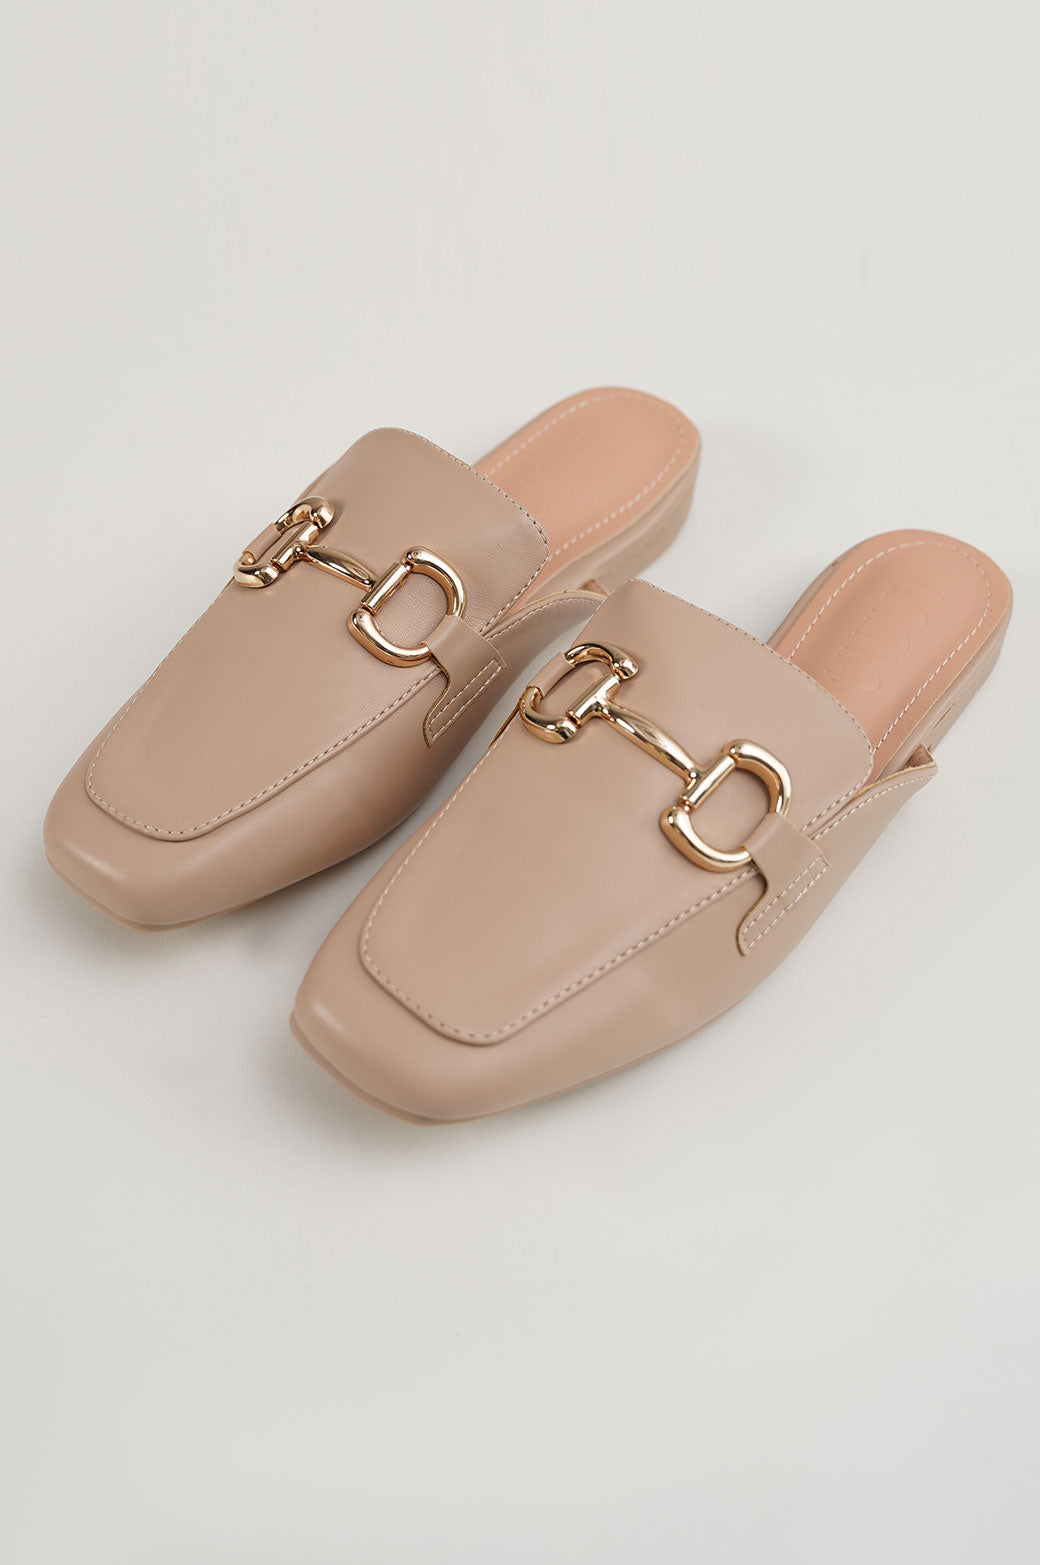 KHAKI SMART MULES WITH BUCKLE